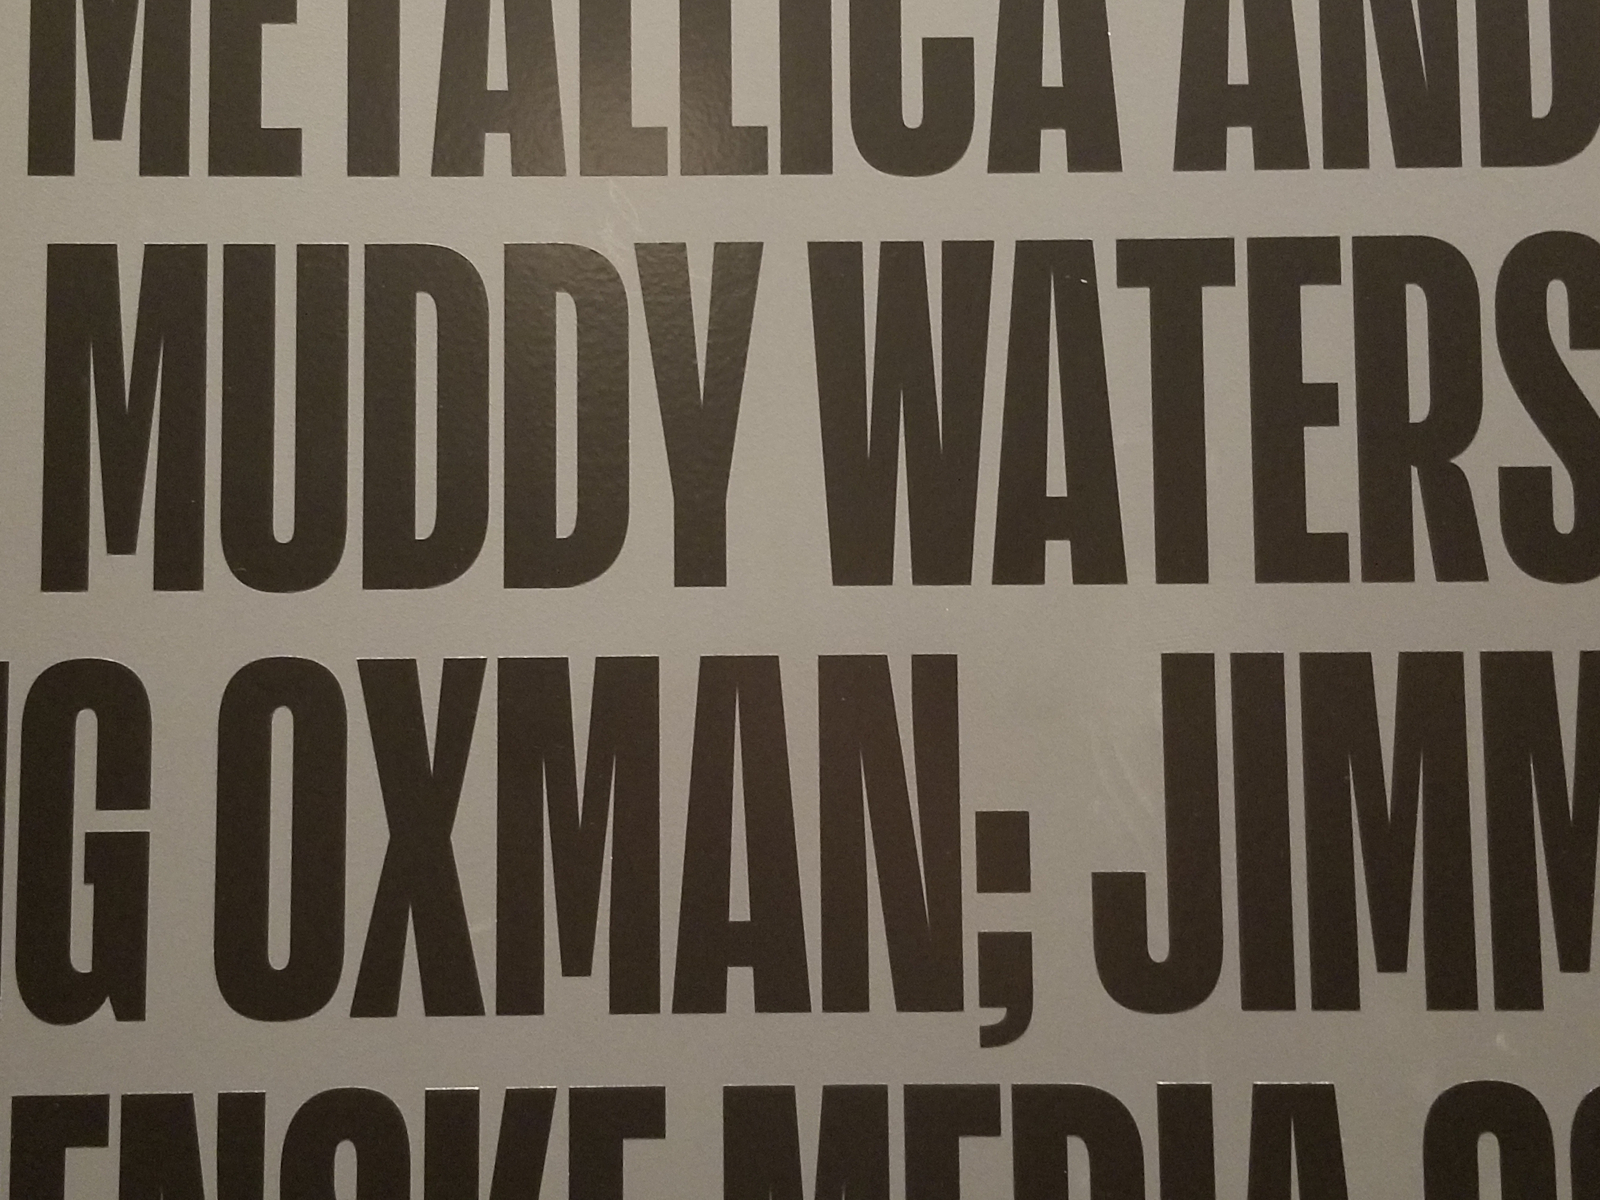 poster including muddy waters's name